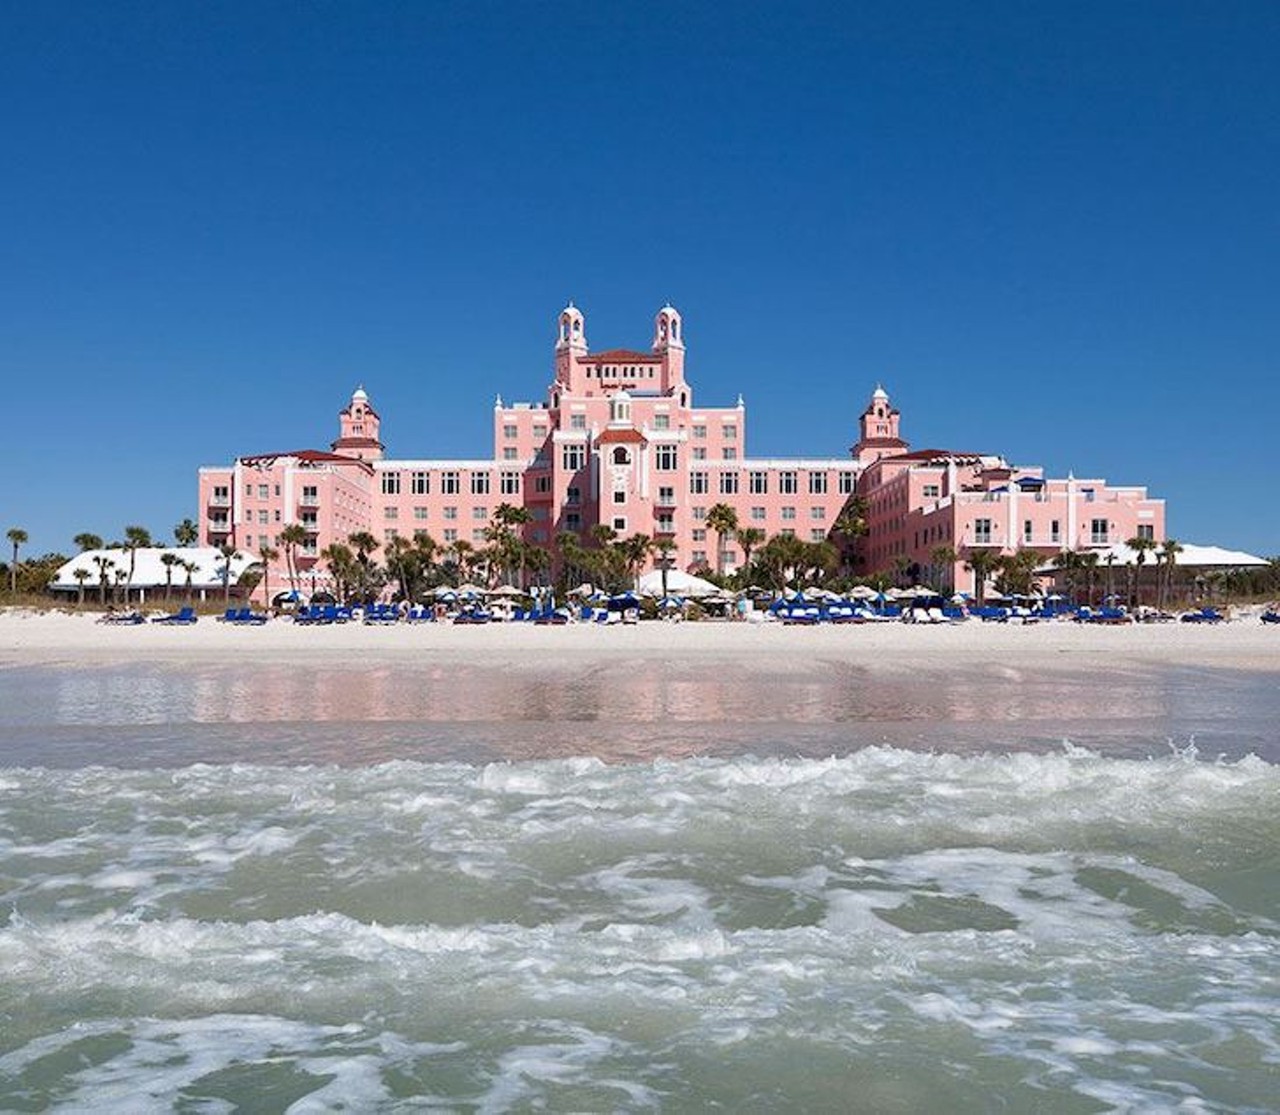 The Don CeSar
3400 Gulf Blvd, St. Pete Beach, FL
Built in 1928, The &#147;Pink Palace&#148;  sits on St. Pete beach and is not only known for its extravagant grounds, but also for its haunted hotel rooms. Many guests reported seeing a man with a top-hat walking into rooms and terrorizing guests. Others report the hotel&#146;s original owner, Thomas Rowe, wandering around the property.  
Photo via doncesar.com